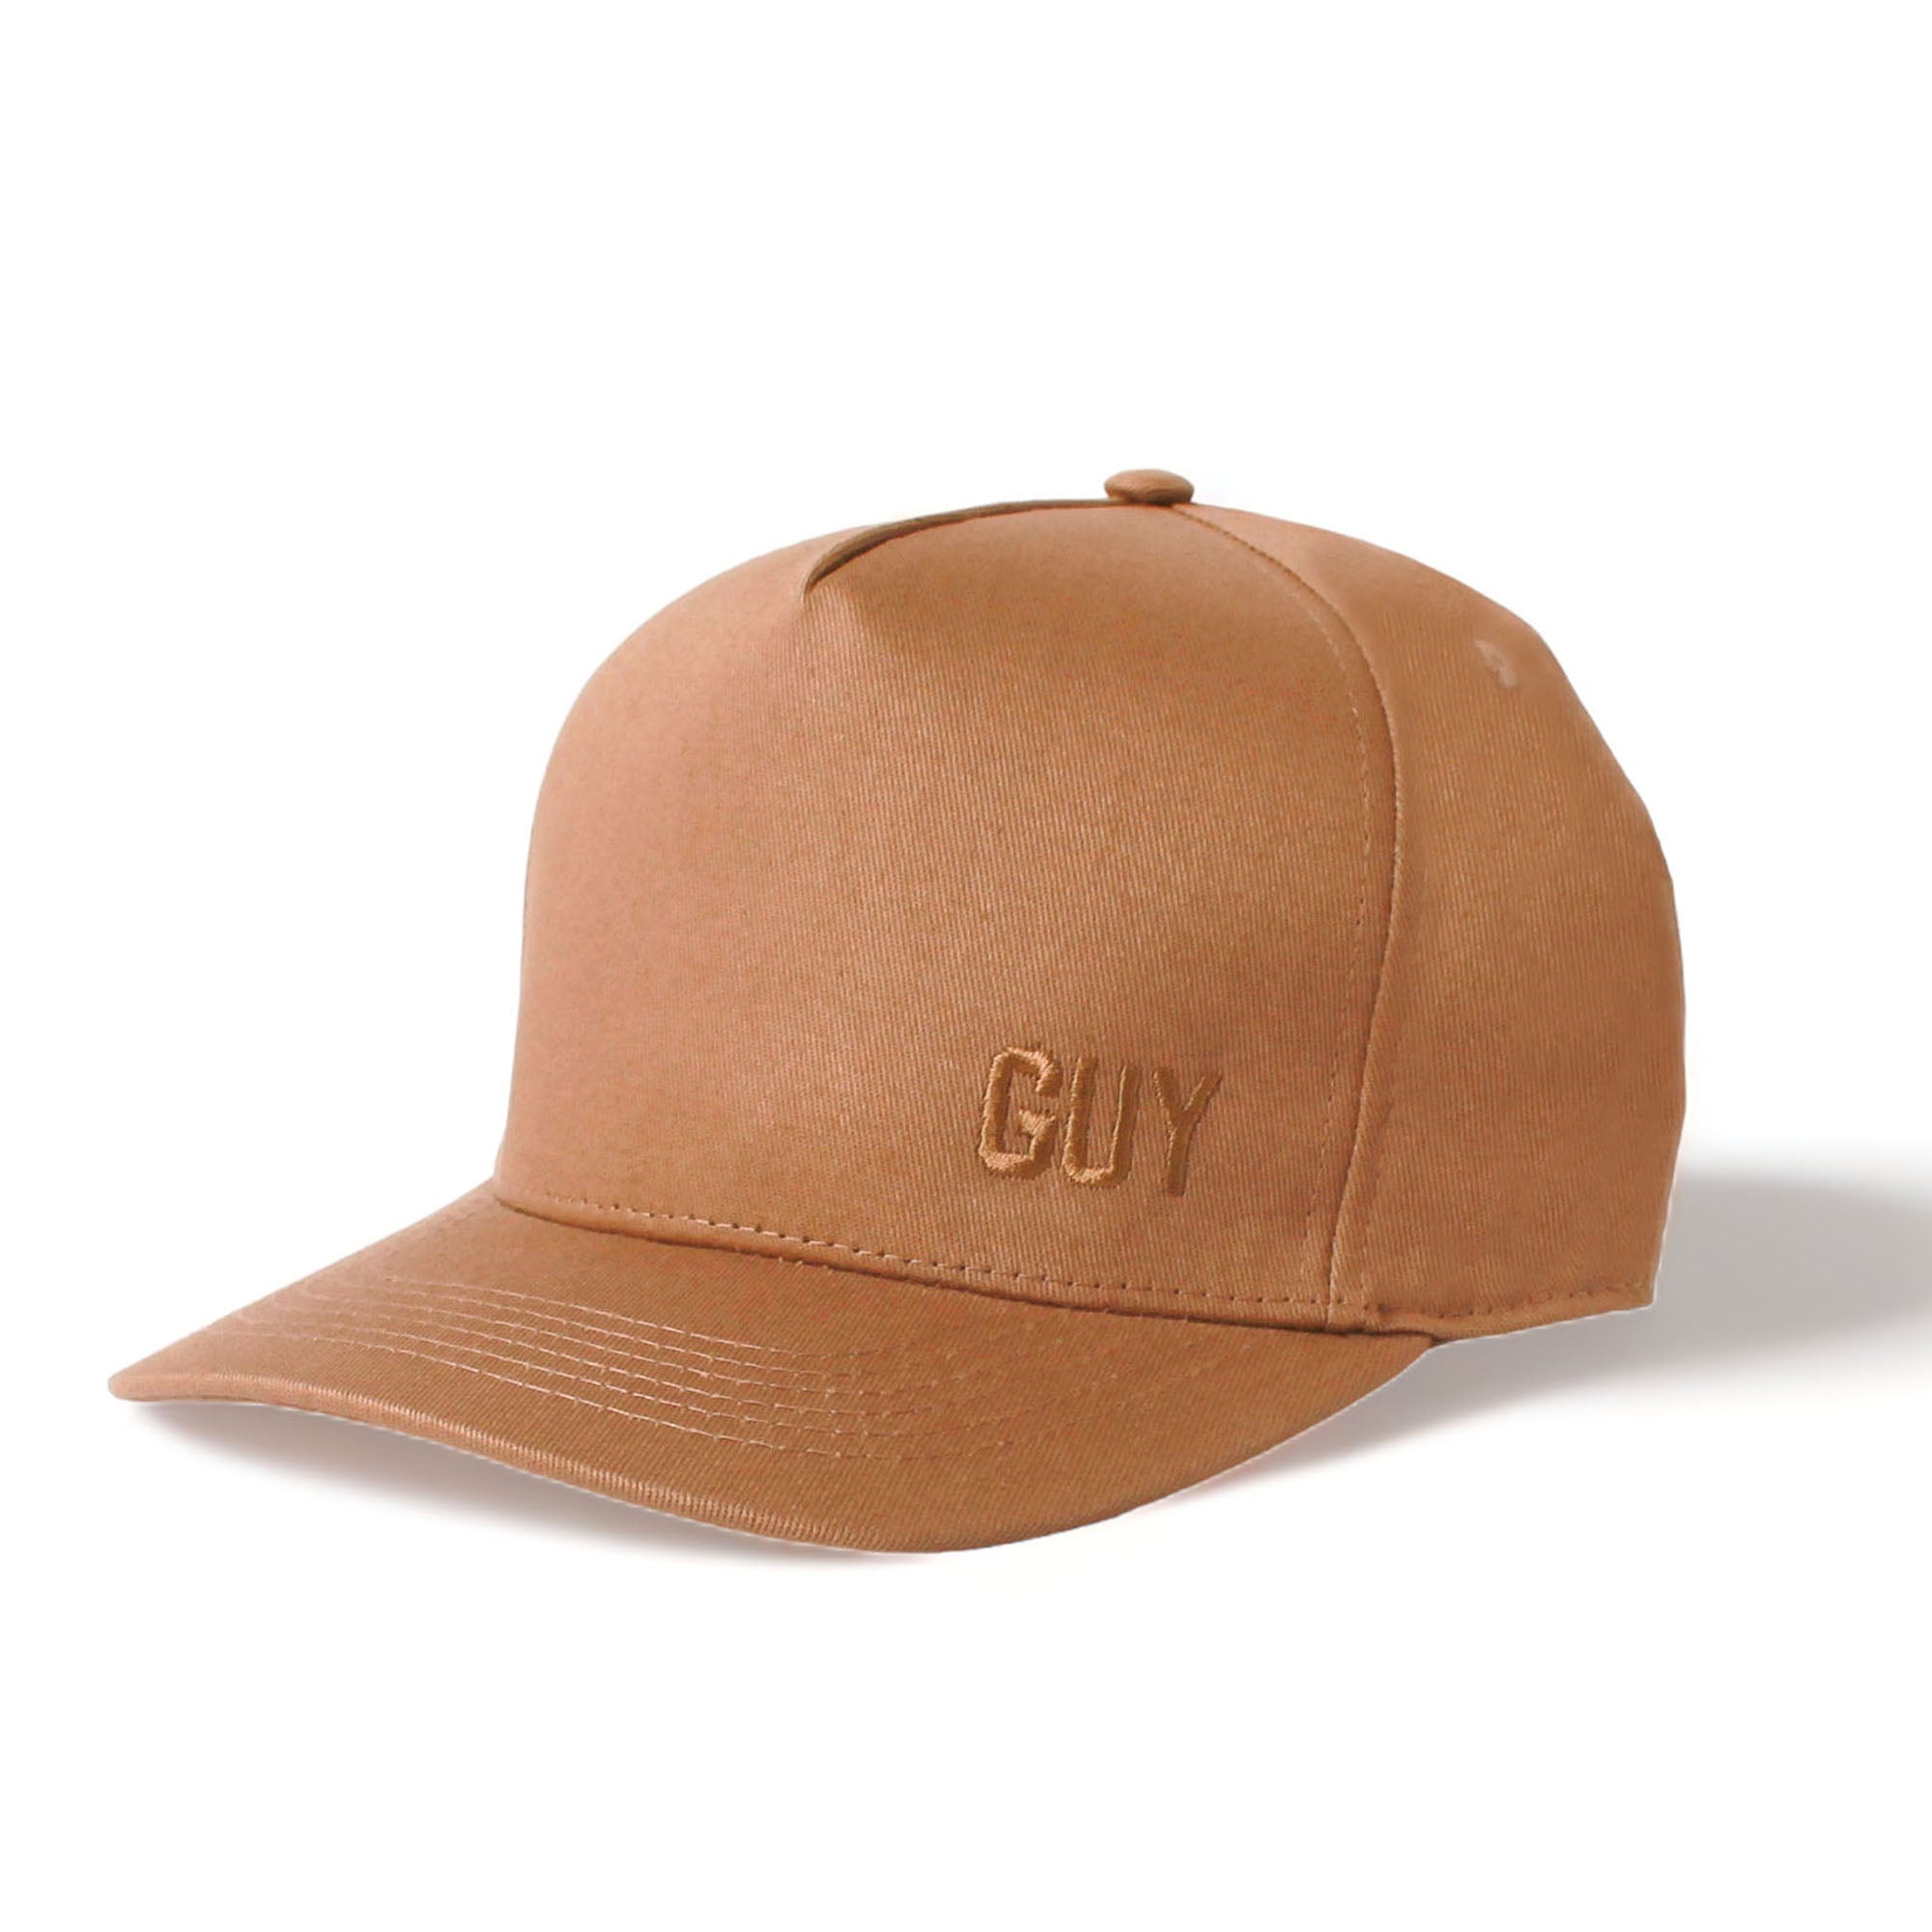 personalised customised brown / mocha snapback hat for kids and adults